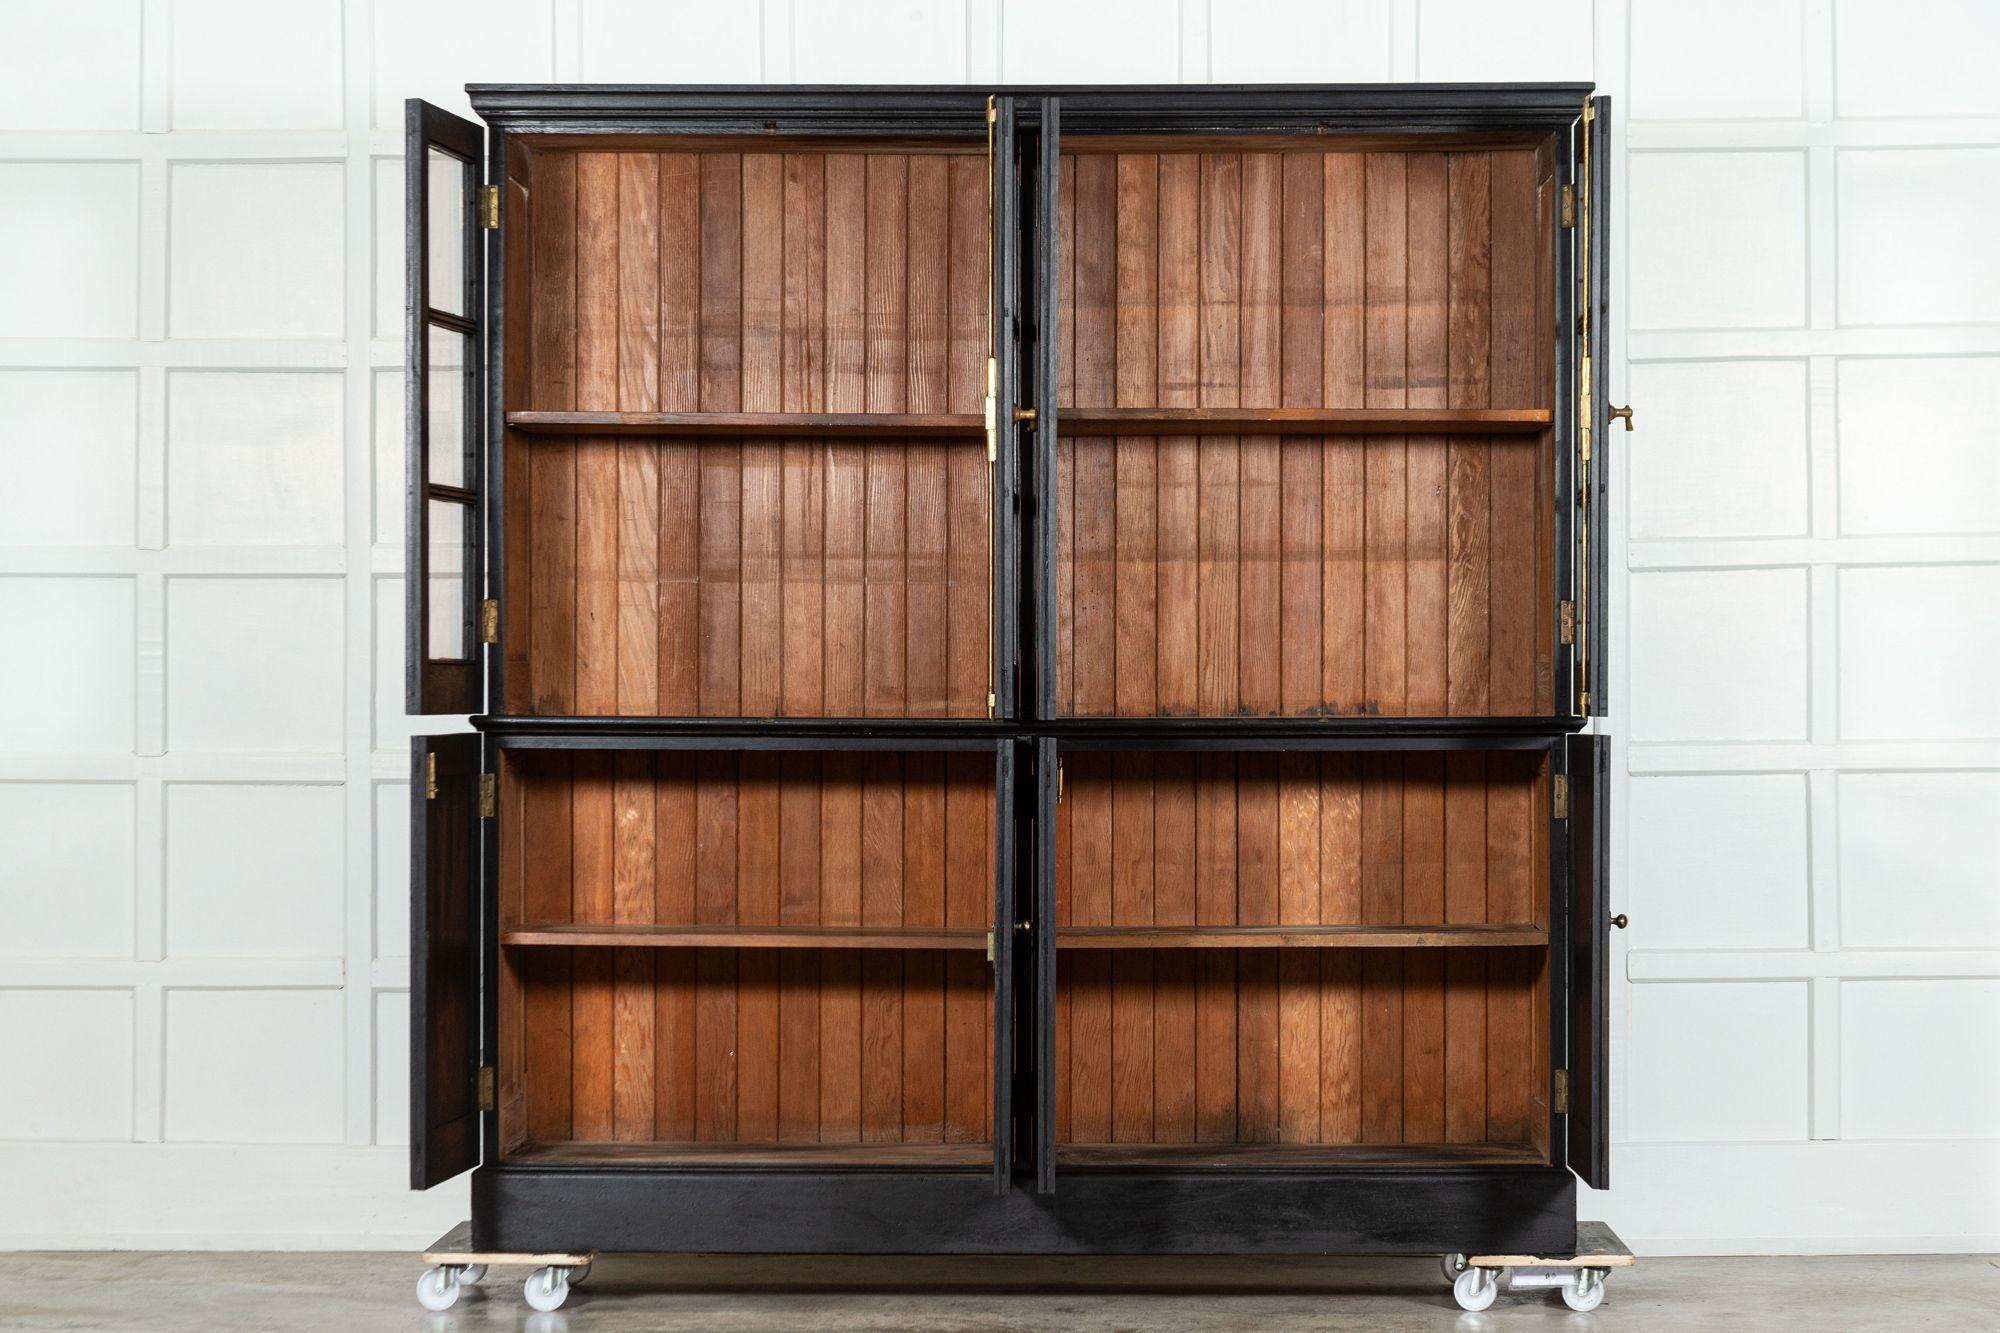 circa 1900
Large 19thC English Grain Ebonised Pine Bookcase
Price is each
x1 left
sku 1038
Together W198 x D52 x H203 cm
Base W193 x D50 x H91 cm
Top W198 x D52 x H112 cm